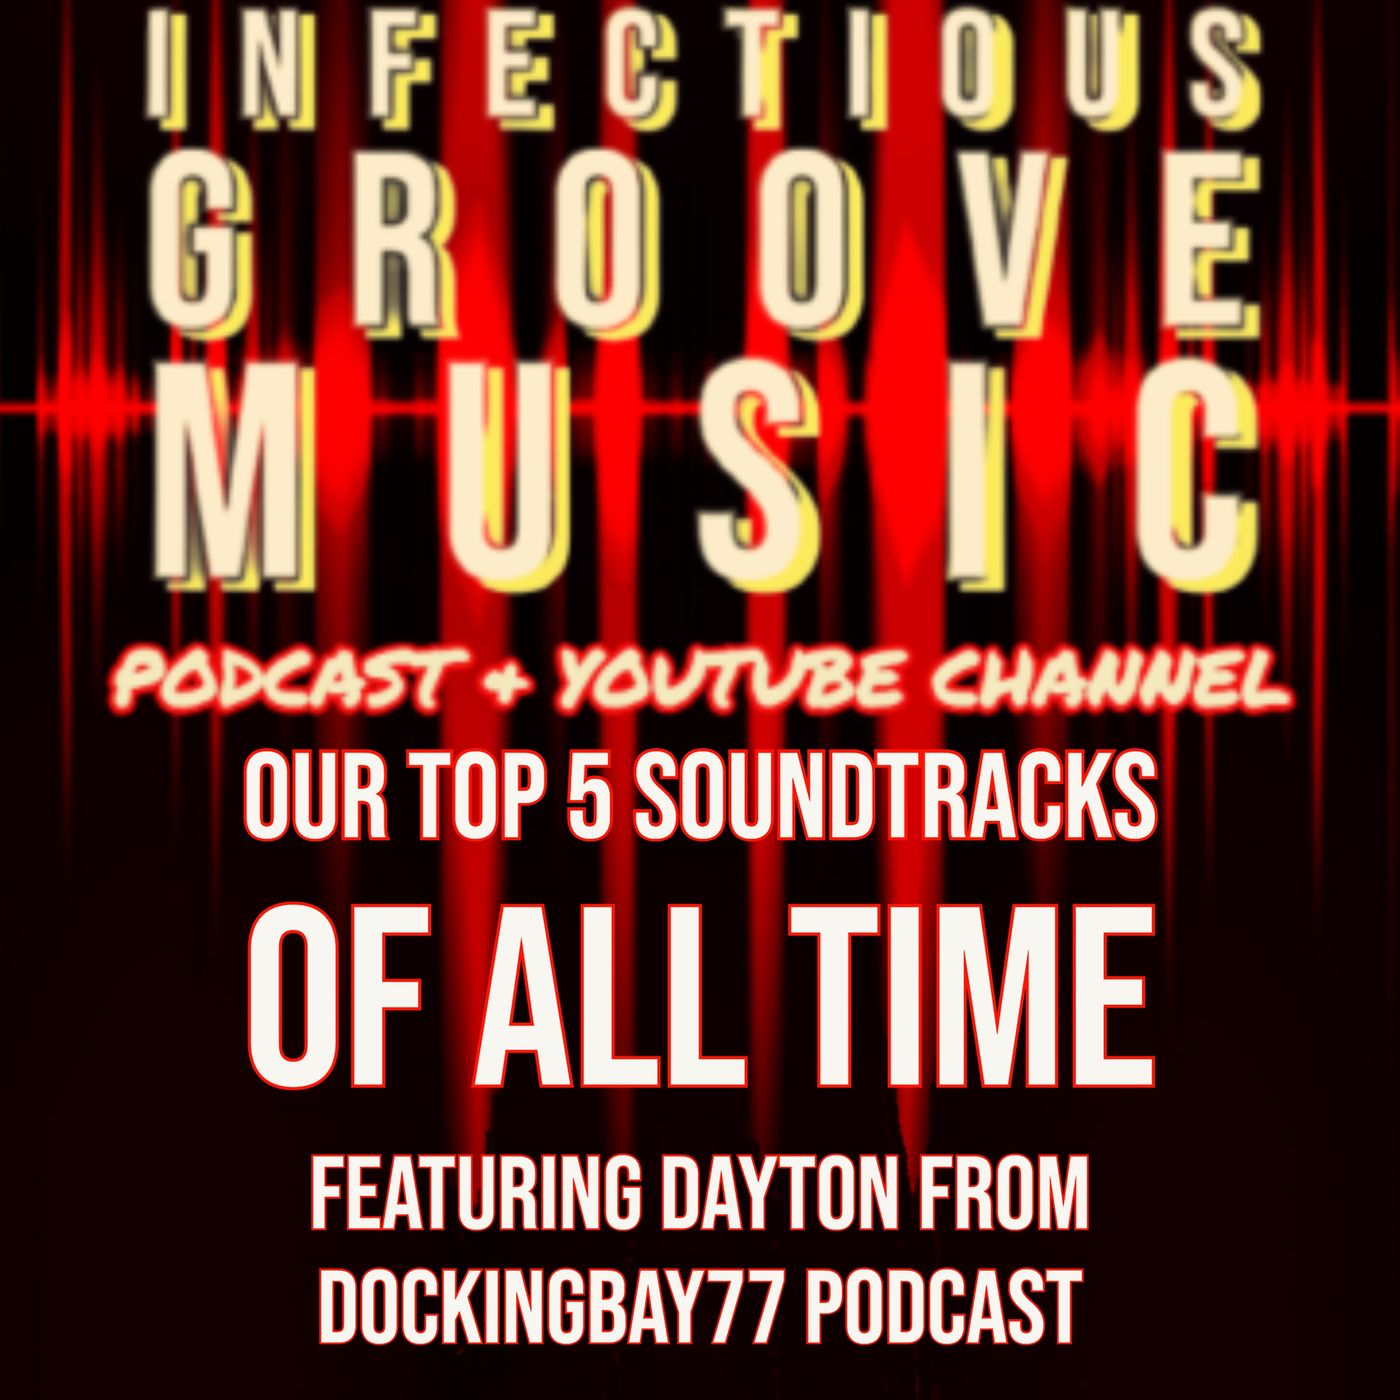 Our Top 5 Soundtracks of All Time featuring Dayton from dockingbay77 Podcast